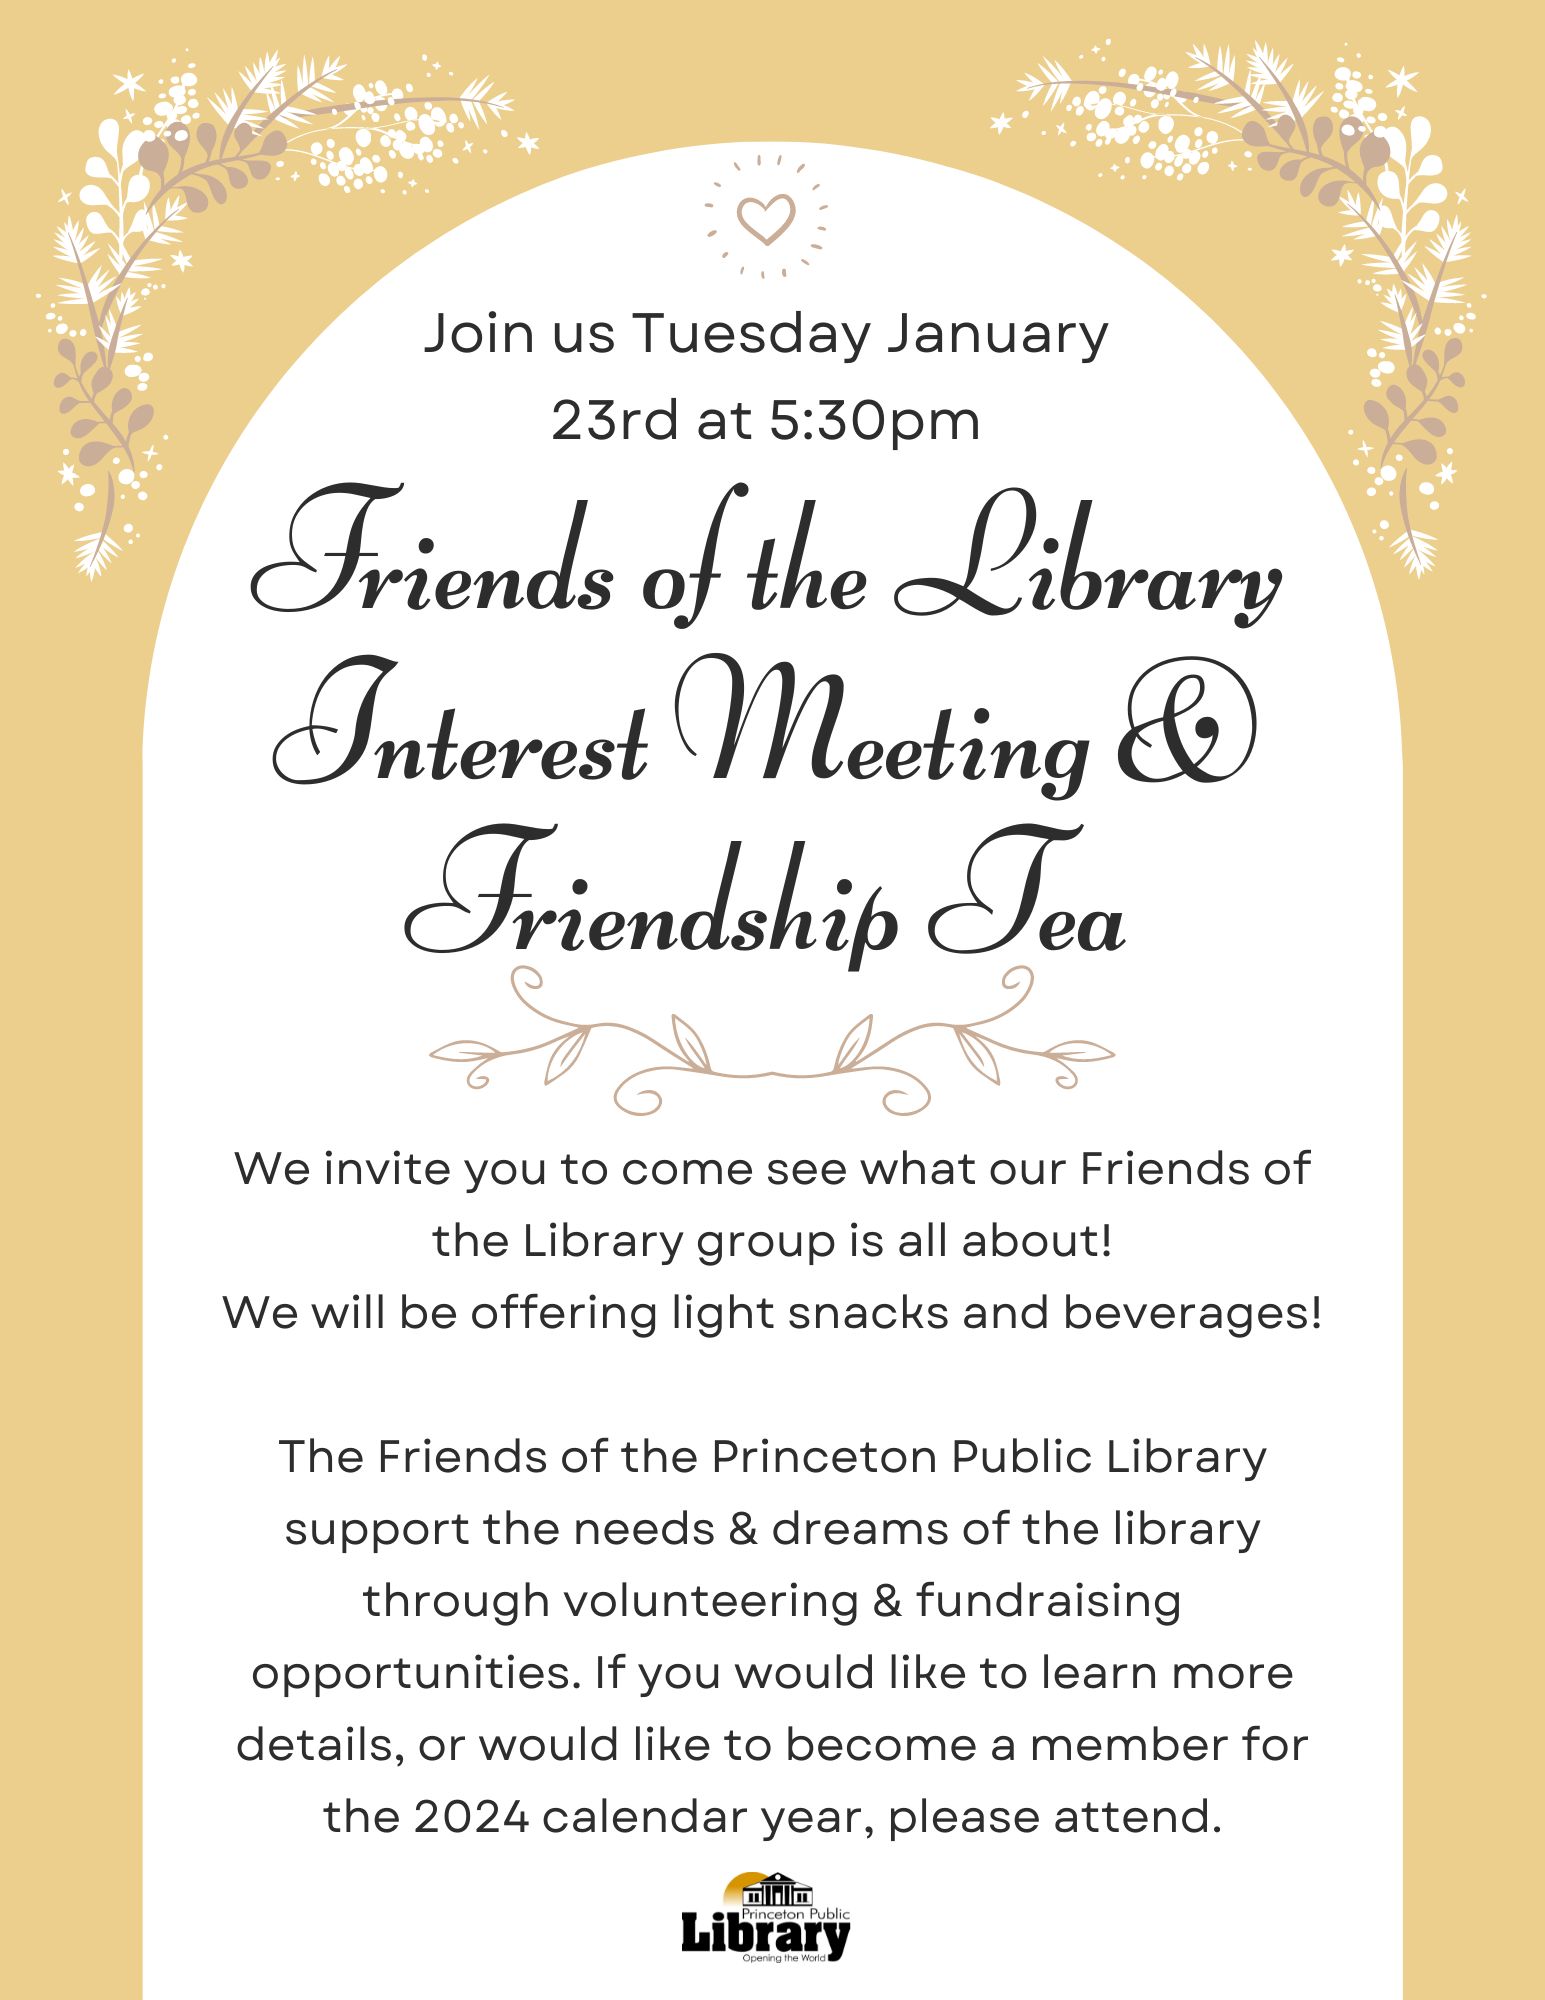 friends of the library interest meeting & friendship tea